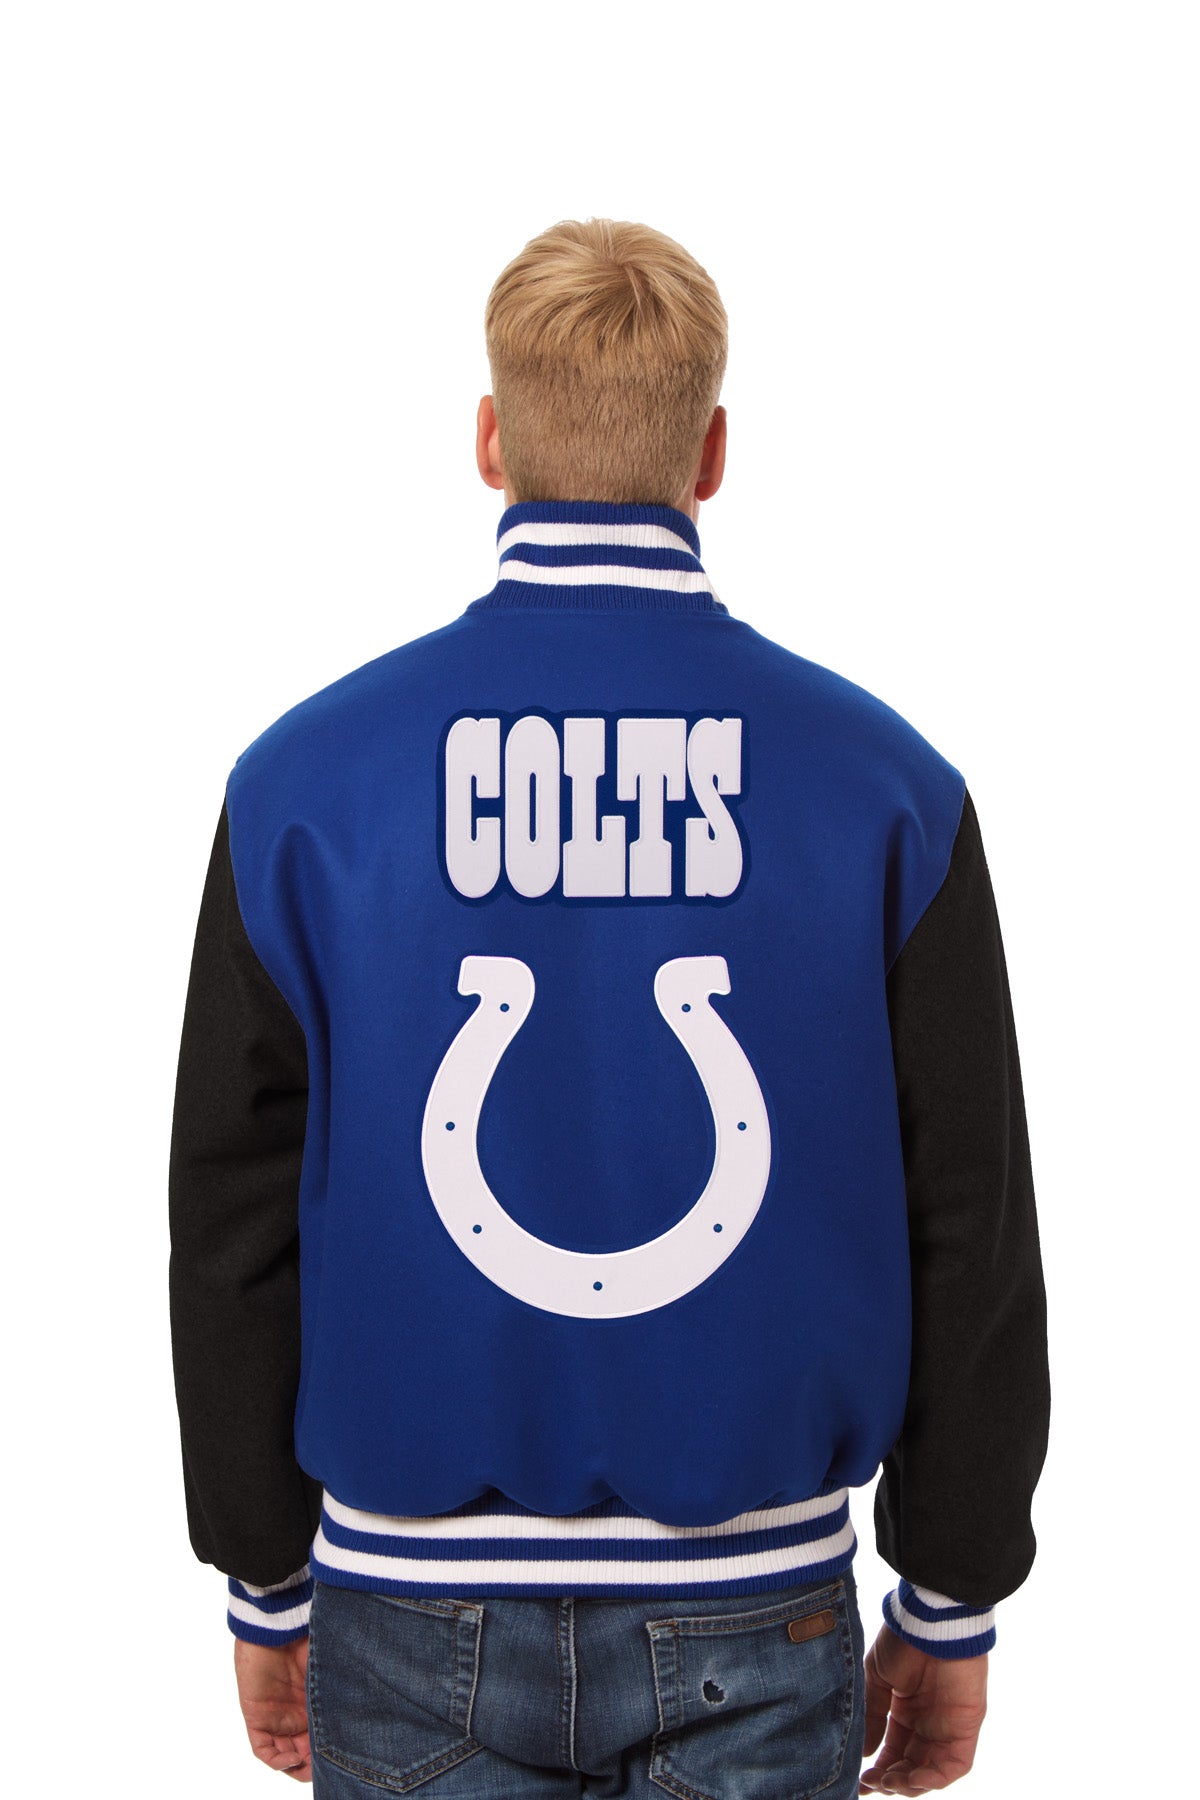 Indianapolis Colts Embroidered Wool Jacket